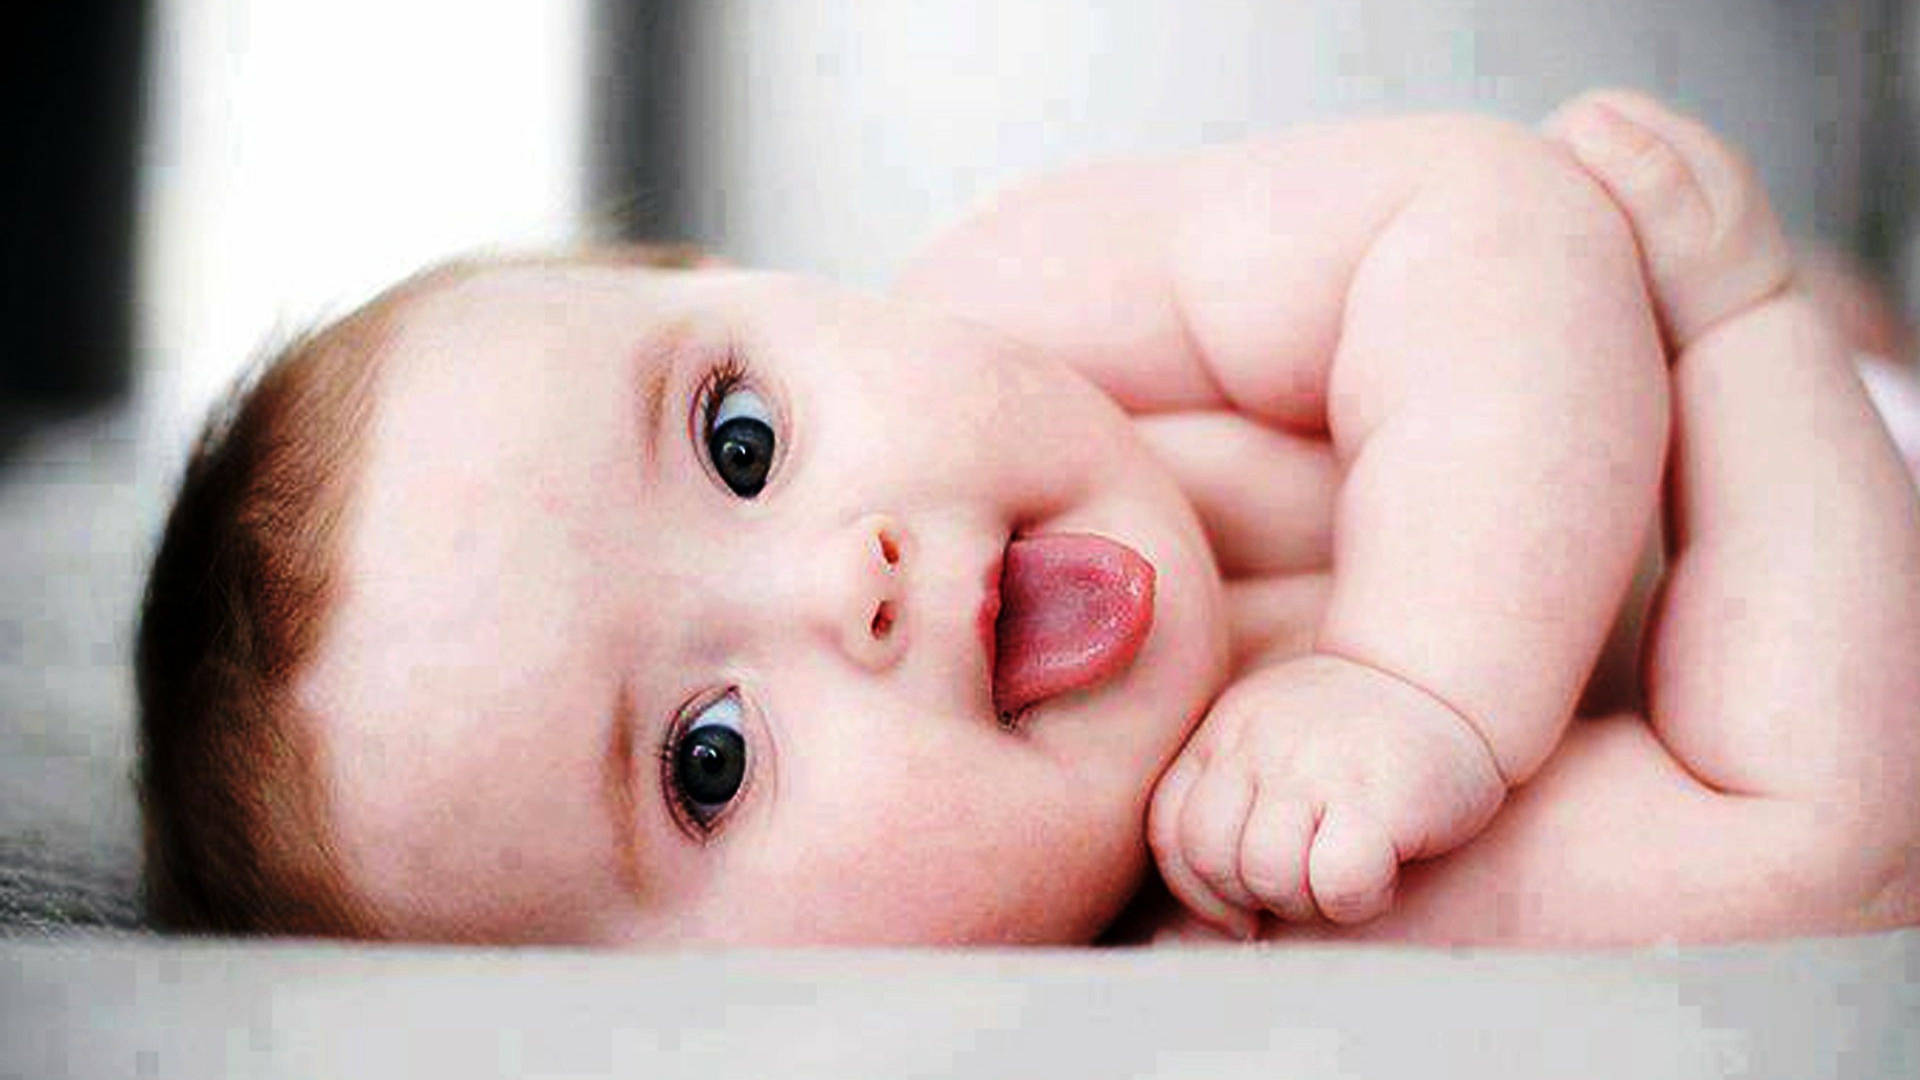 A Cute Baby, Ready For Fun With His Tongue Out Background